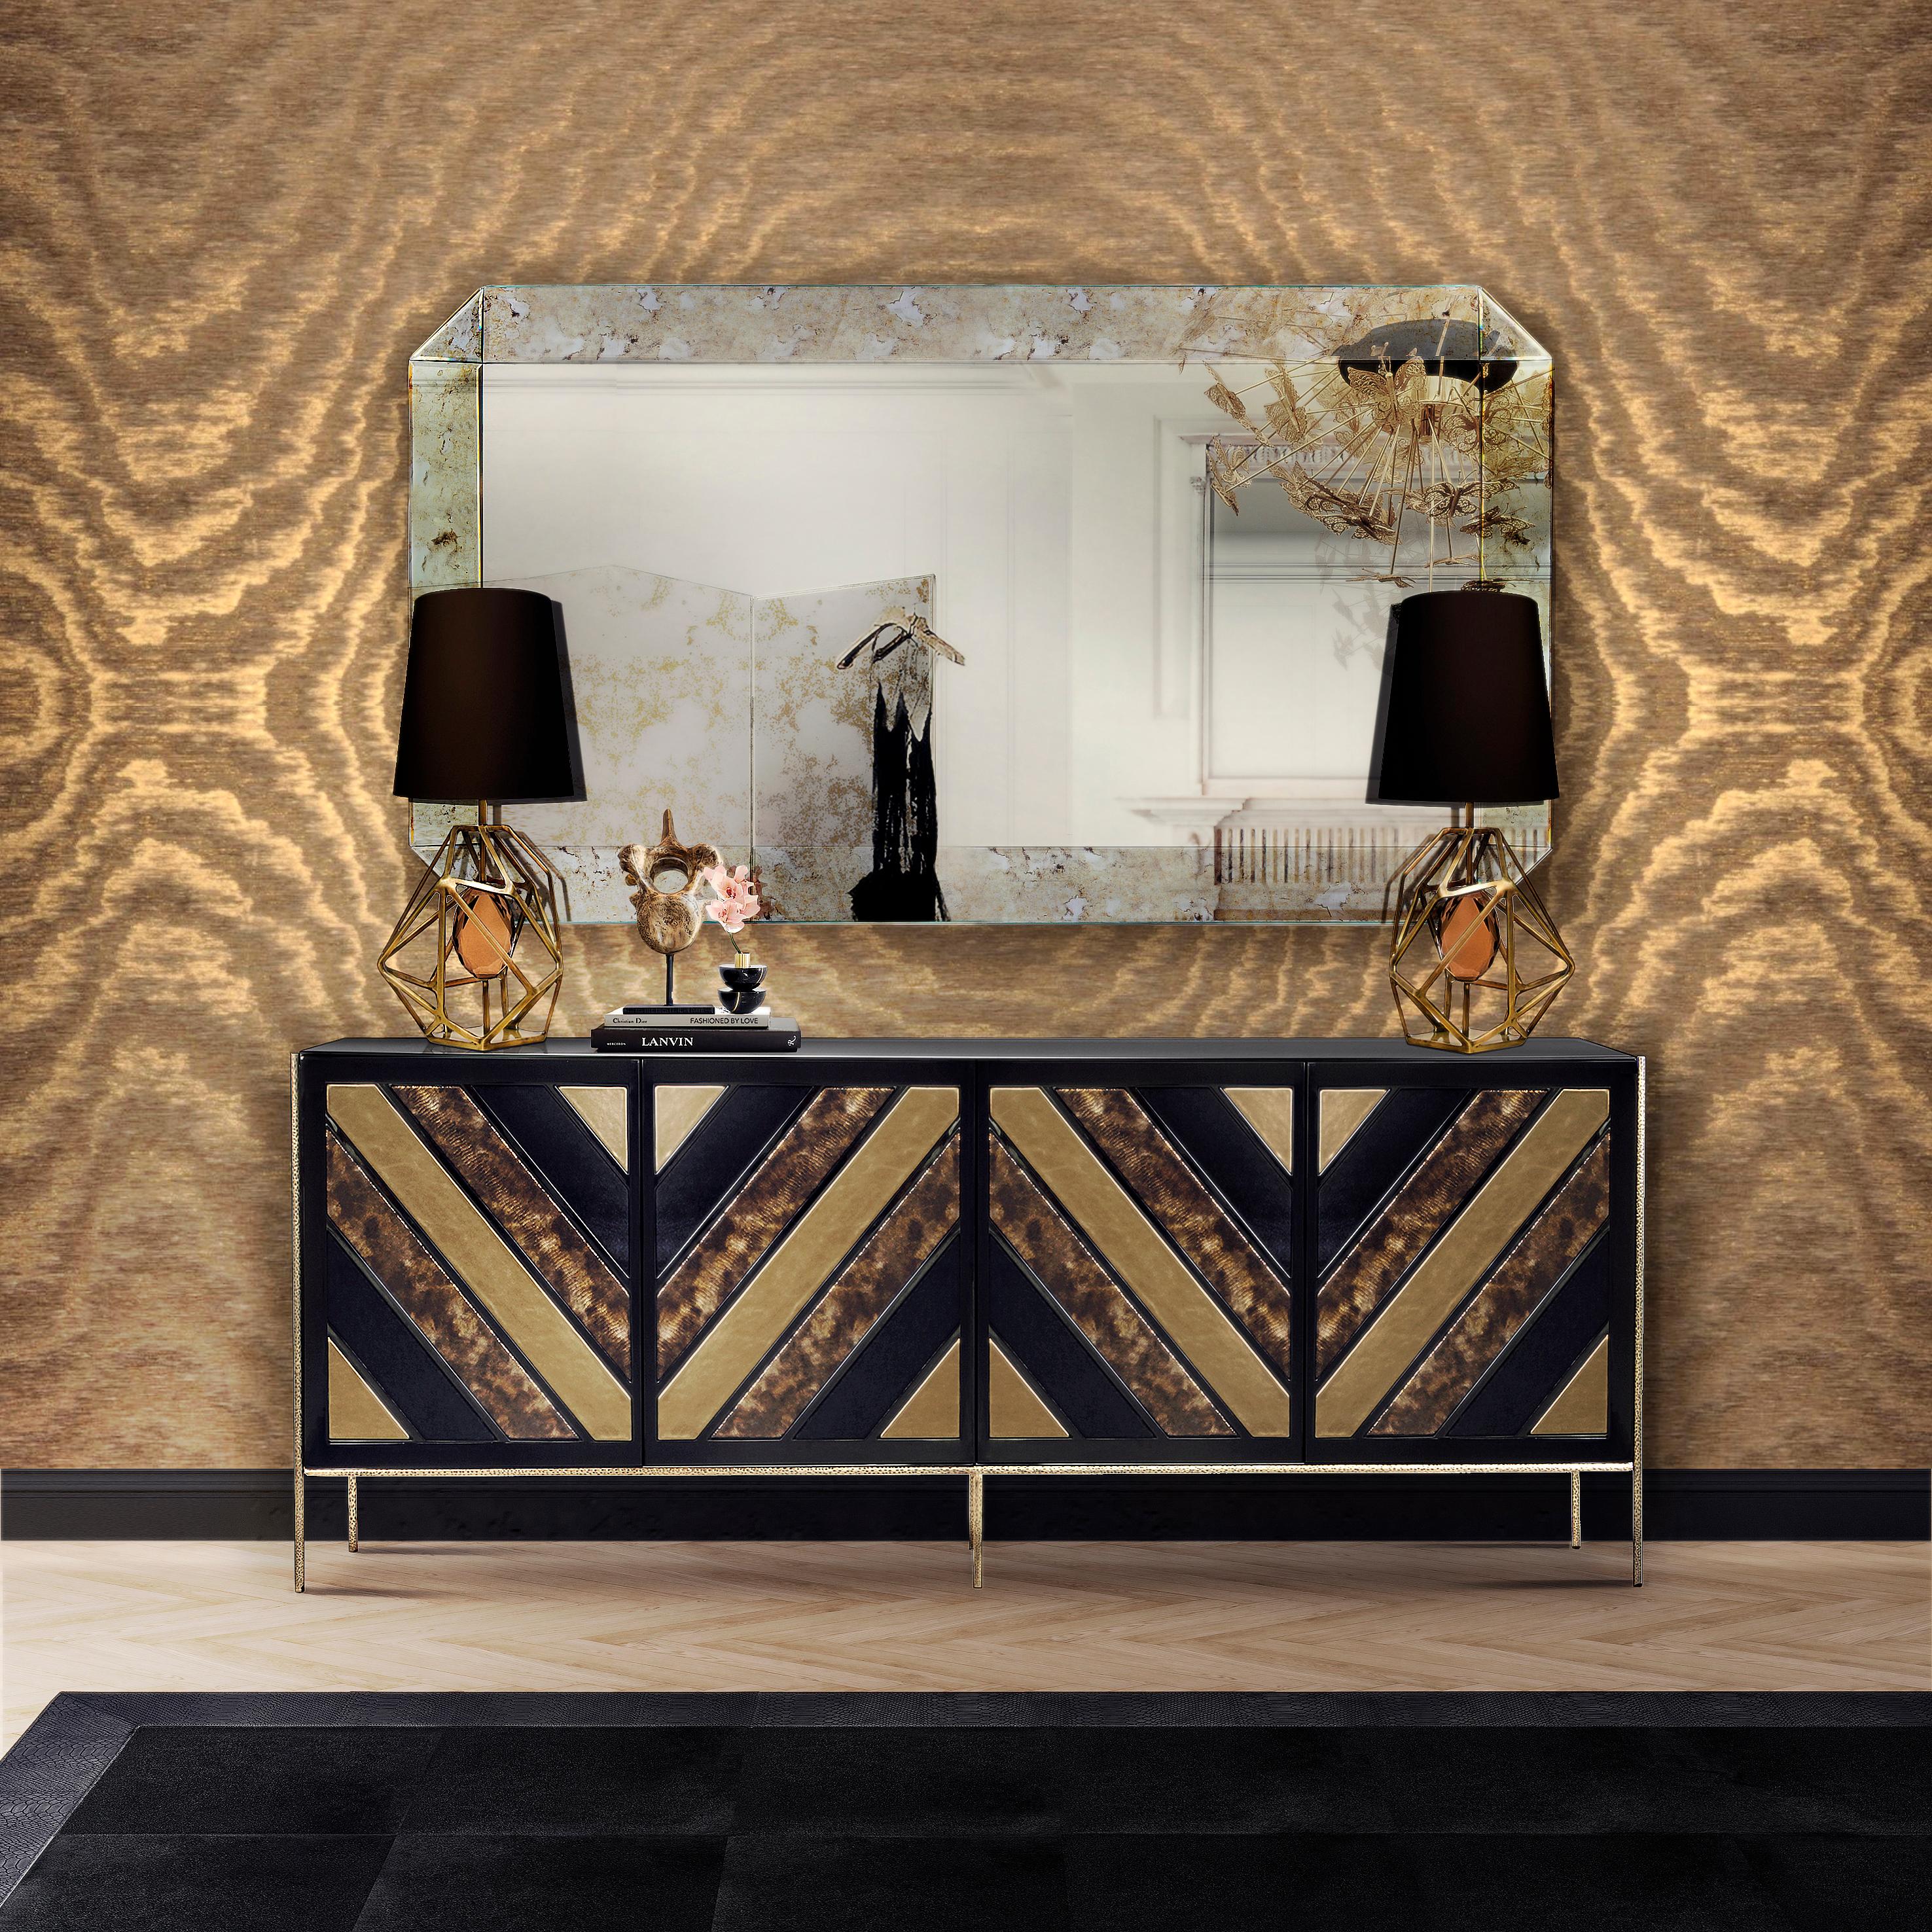 The geometric design and exotic finishes of the Opium Cabinet will seduce you into a euphoric haze. Decadent, shimmering and natural leathers adorn the four front doors, while sleek and glossy lacquer covers the body. Peek inside to discover four